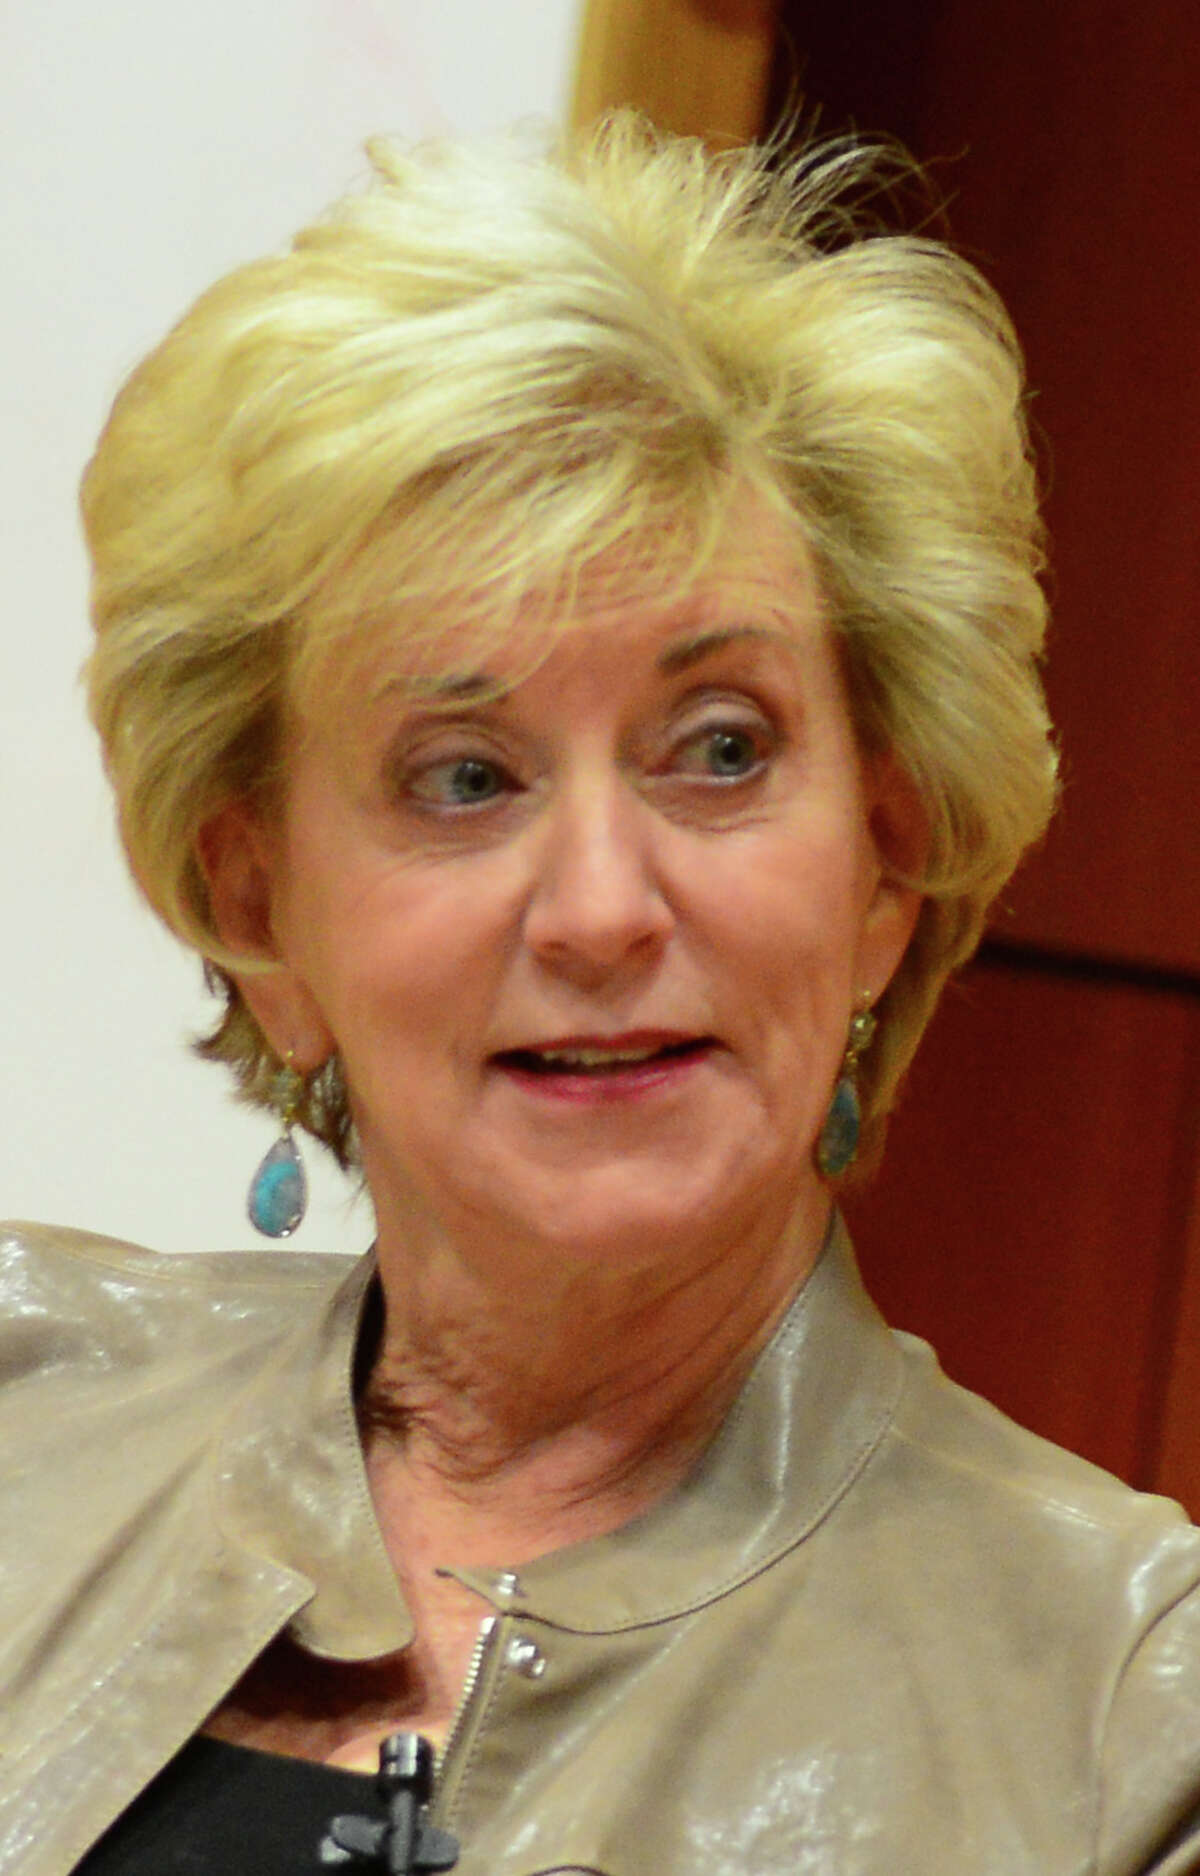 Linda McMahon will be a speaker at the Nation Republican Leadership Summit in Nashua, N.H., in mid-April.